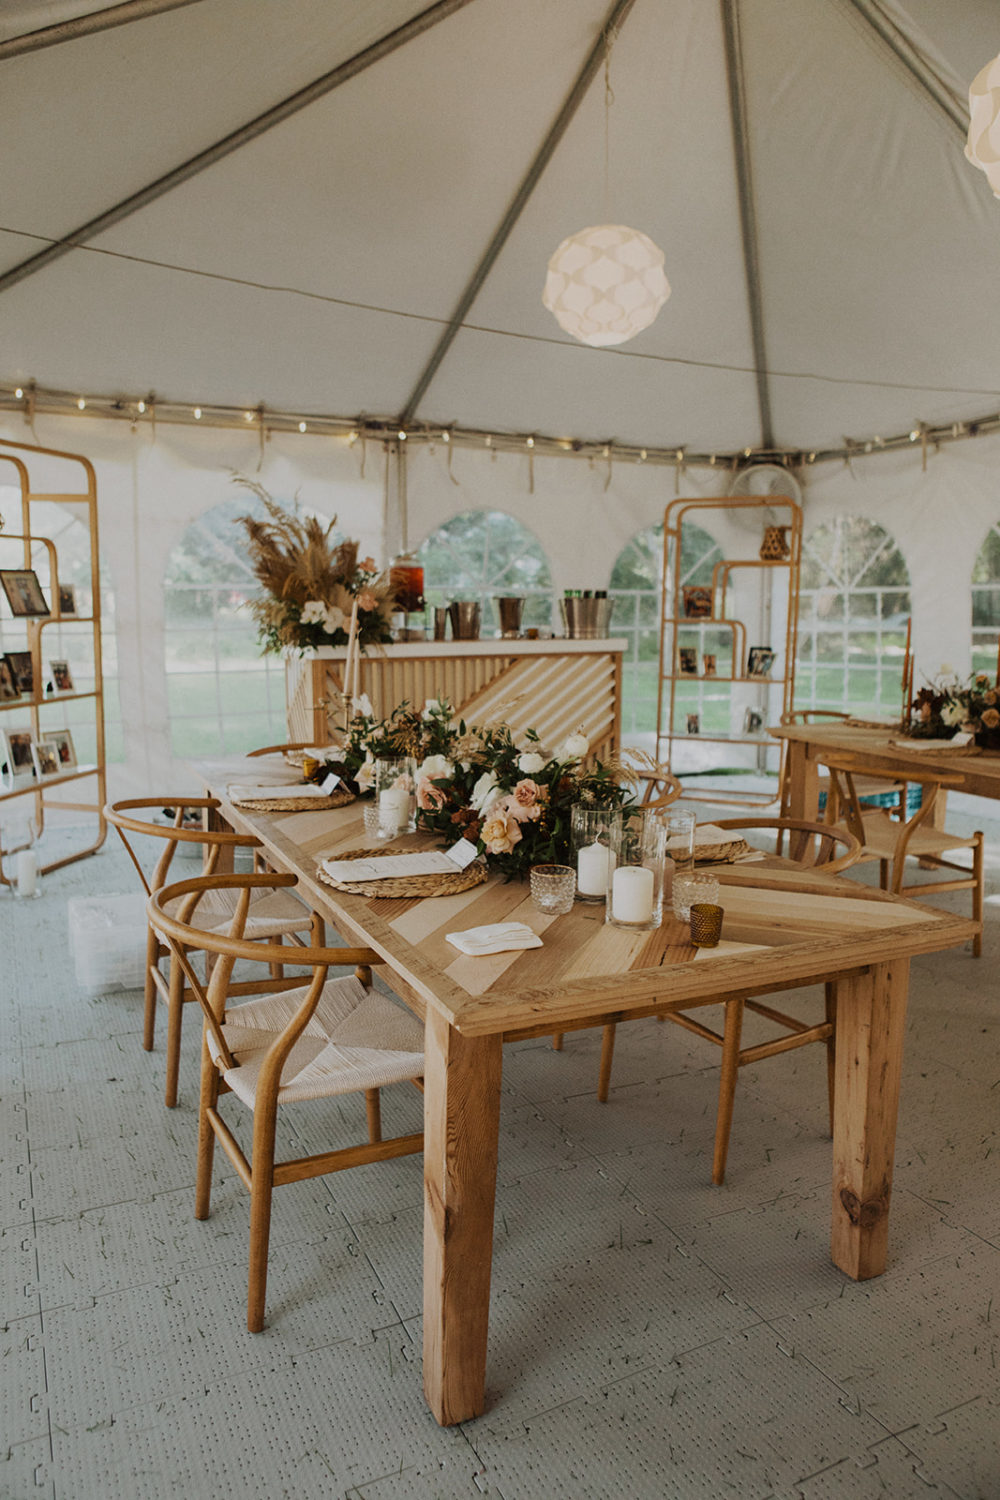 Decorated tables fill the tented wedding reception space